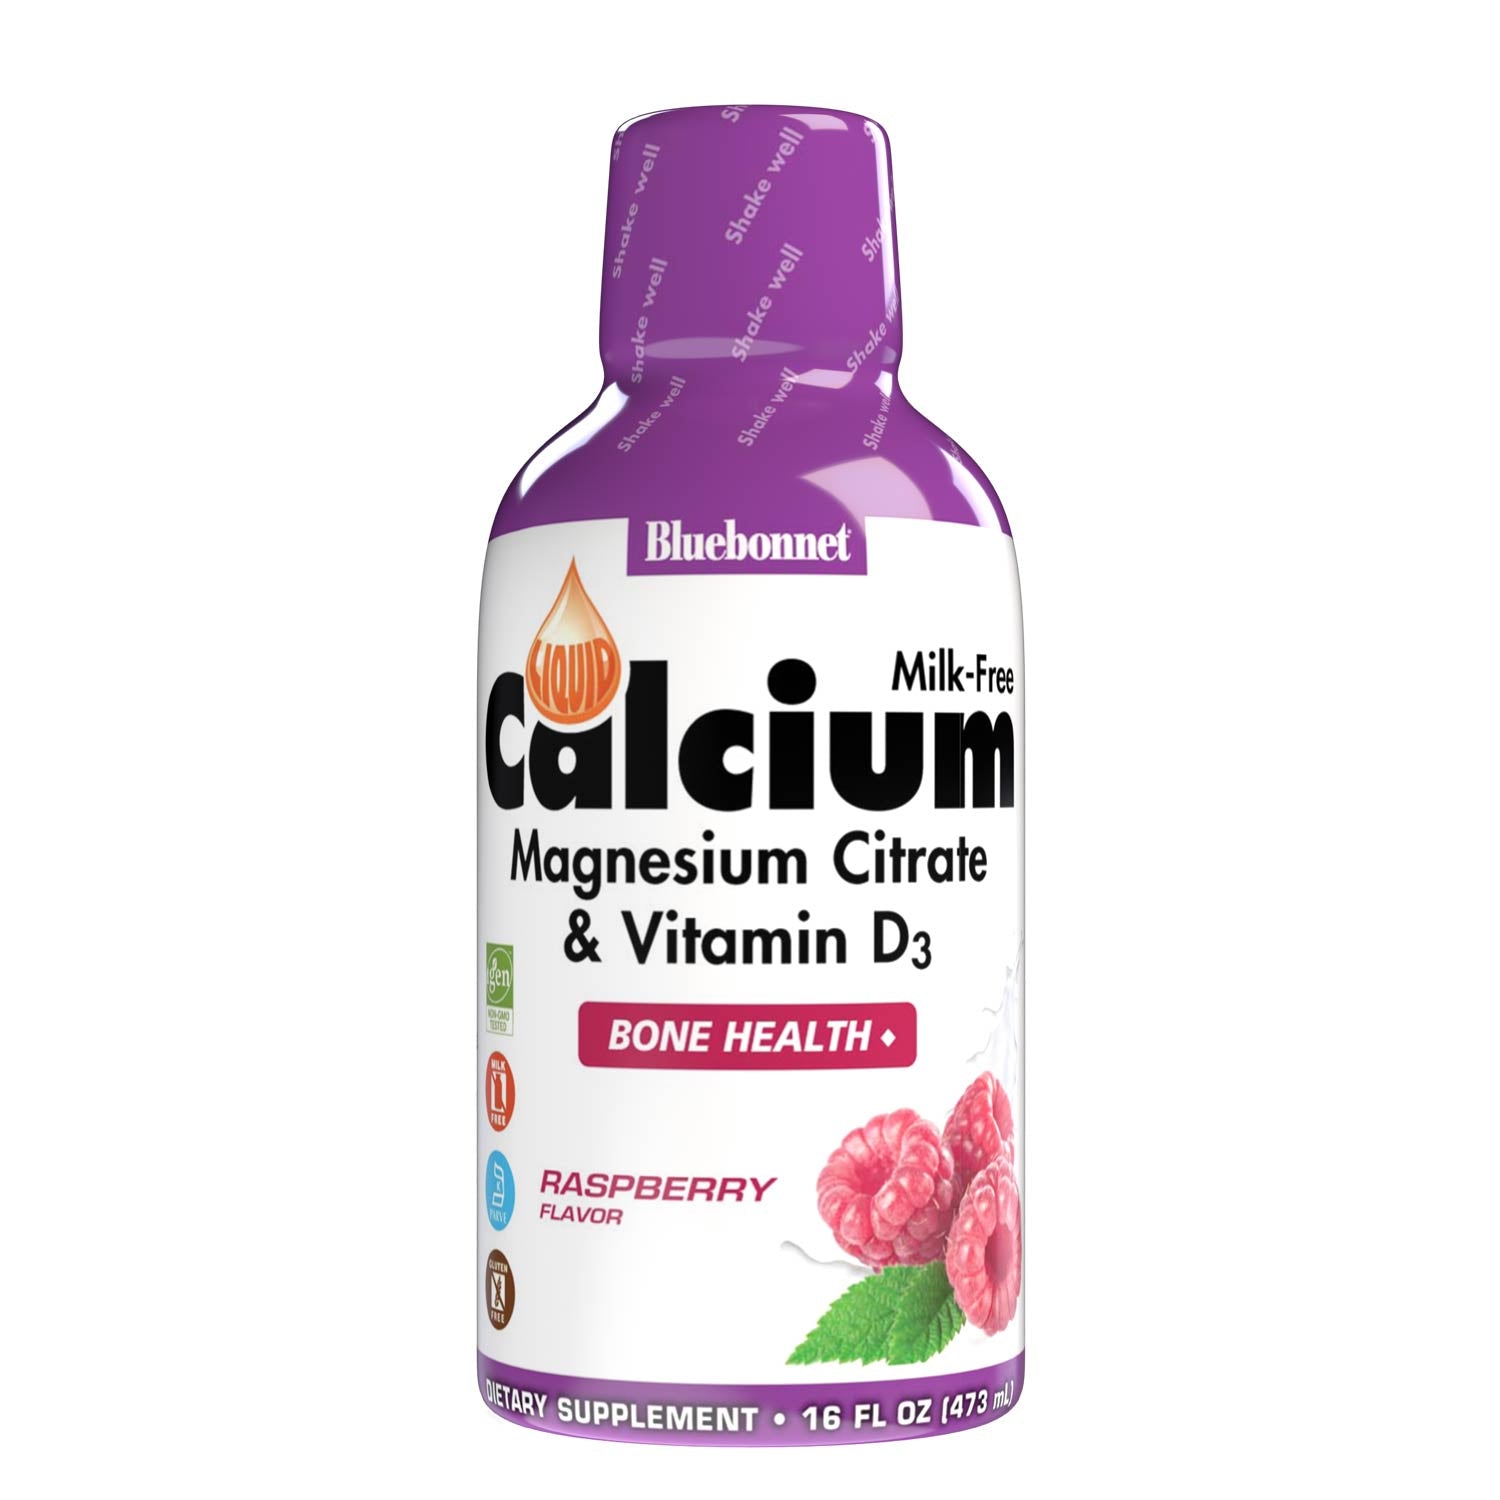 Bluebonnet's Liquid Calcium Magnesium Citrate with Vitamin D3 are formulated with calcium in a chelate of calcium citrate, as well as magnesium in a chelate of magnesium citrate and magnesium aspartate in a delicious raspberry flavor. Plus, this formula are formulated with vitamin D3 (cholecalciferol) from lanolin for strong healthy bones. #size_16 fl oz